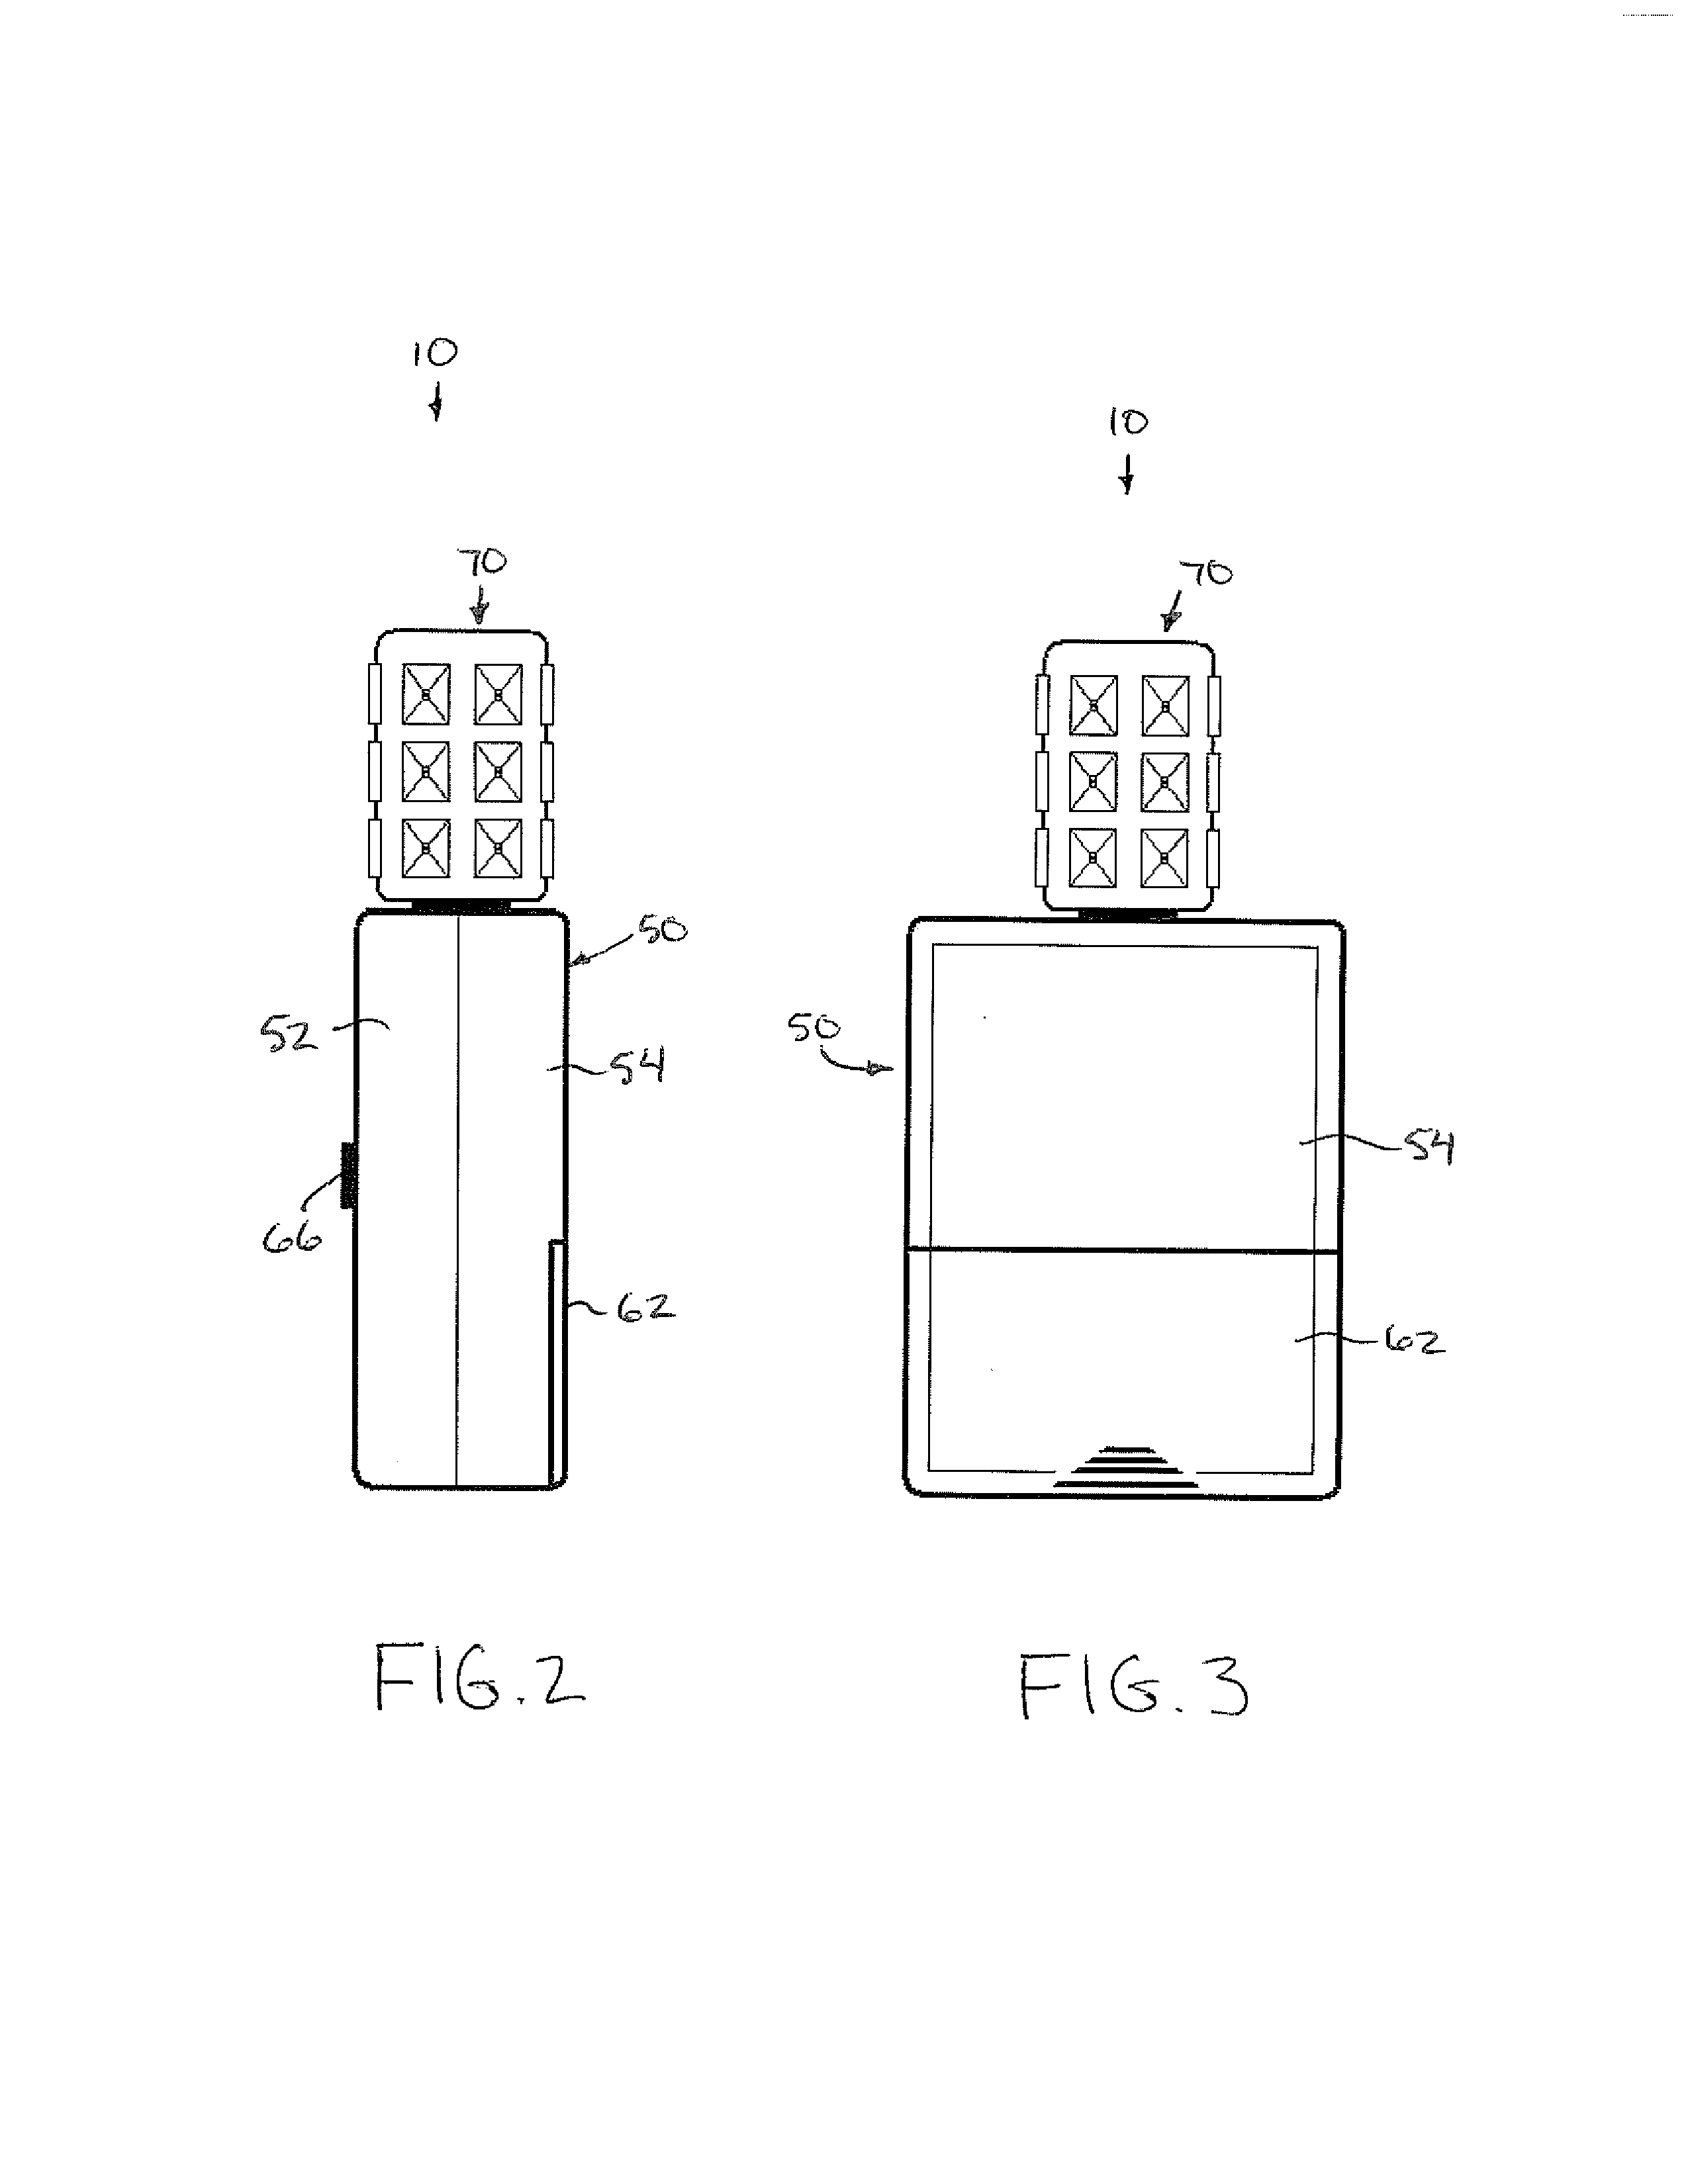 Adapter for Communicating Between an Anti-Personnel Training Device and a User Worn Monitoring Device